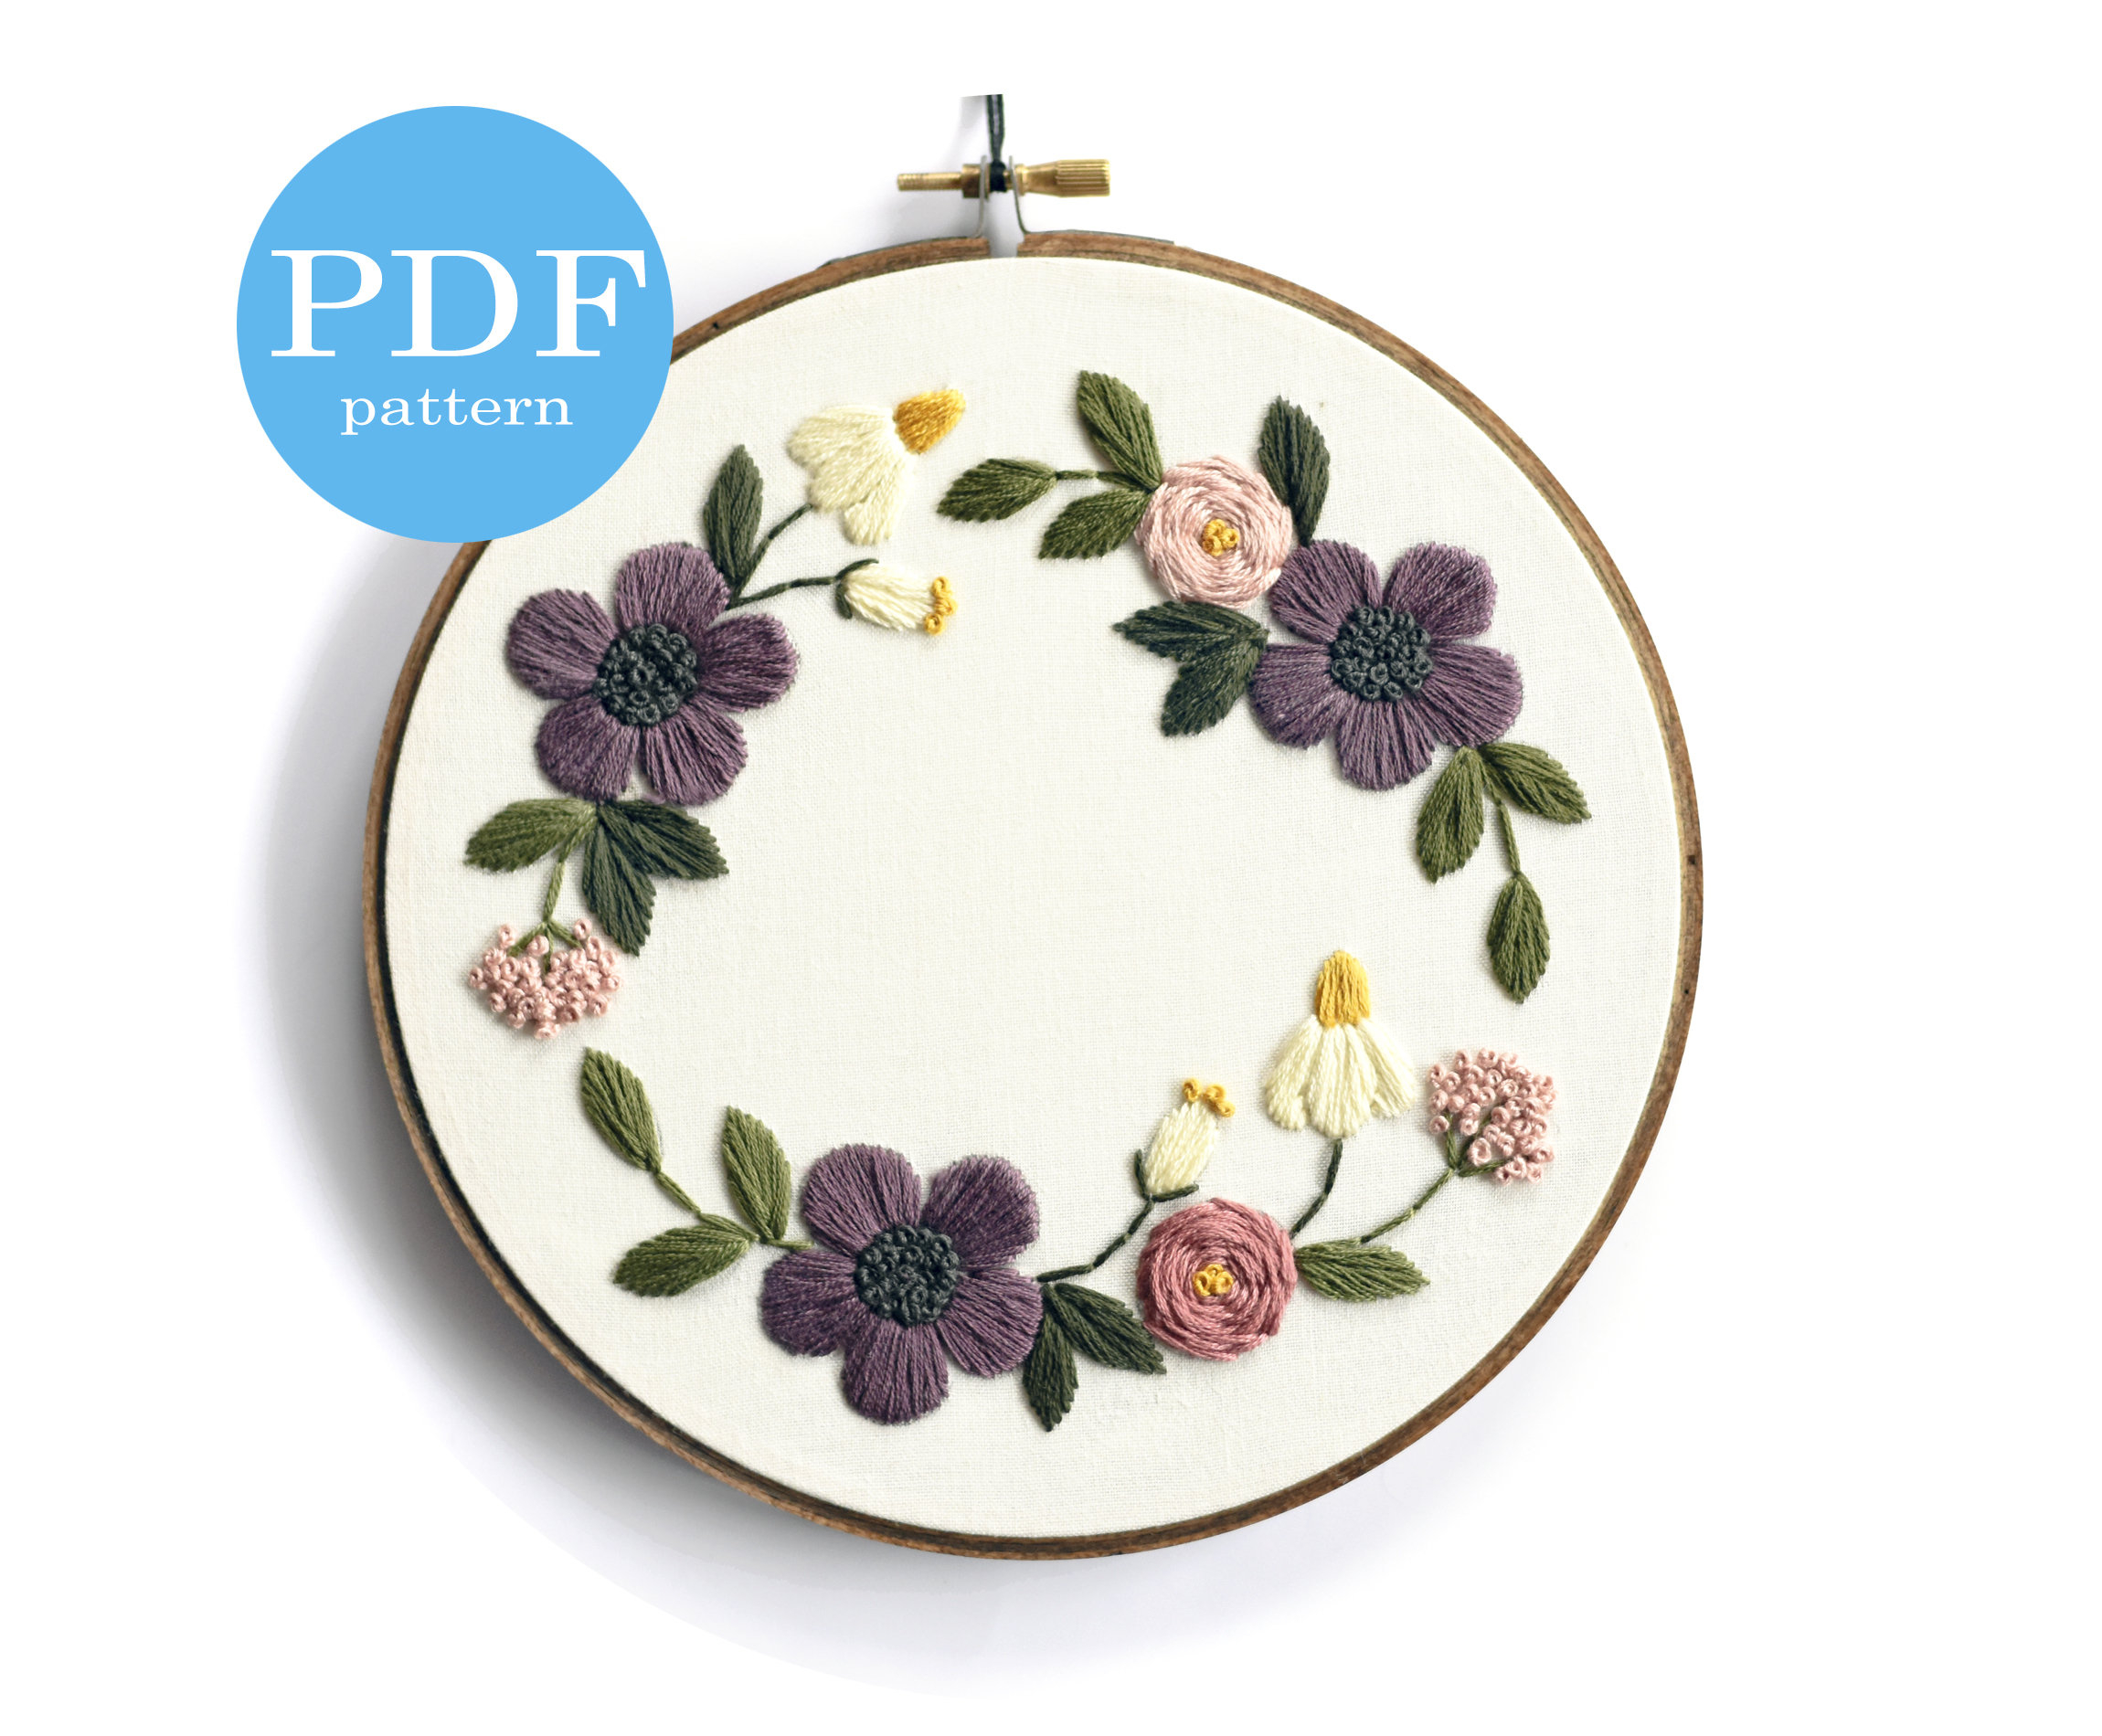 Flower Embroidery Pattern Floral Wreath Embroidery Pattern Pdf Digital Download 7 Embroidery Hoop Diy Home Decor Beginner Embroidery Flower Embroidery Pattern